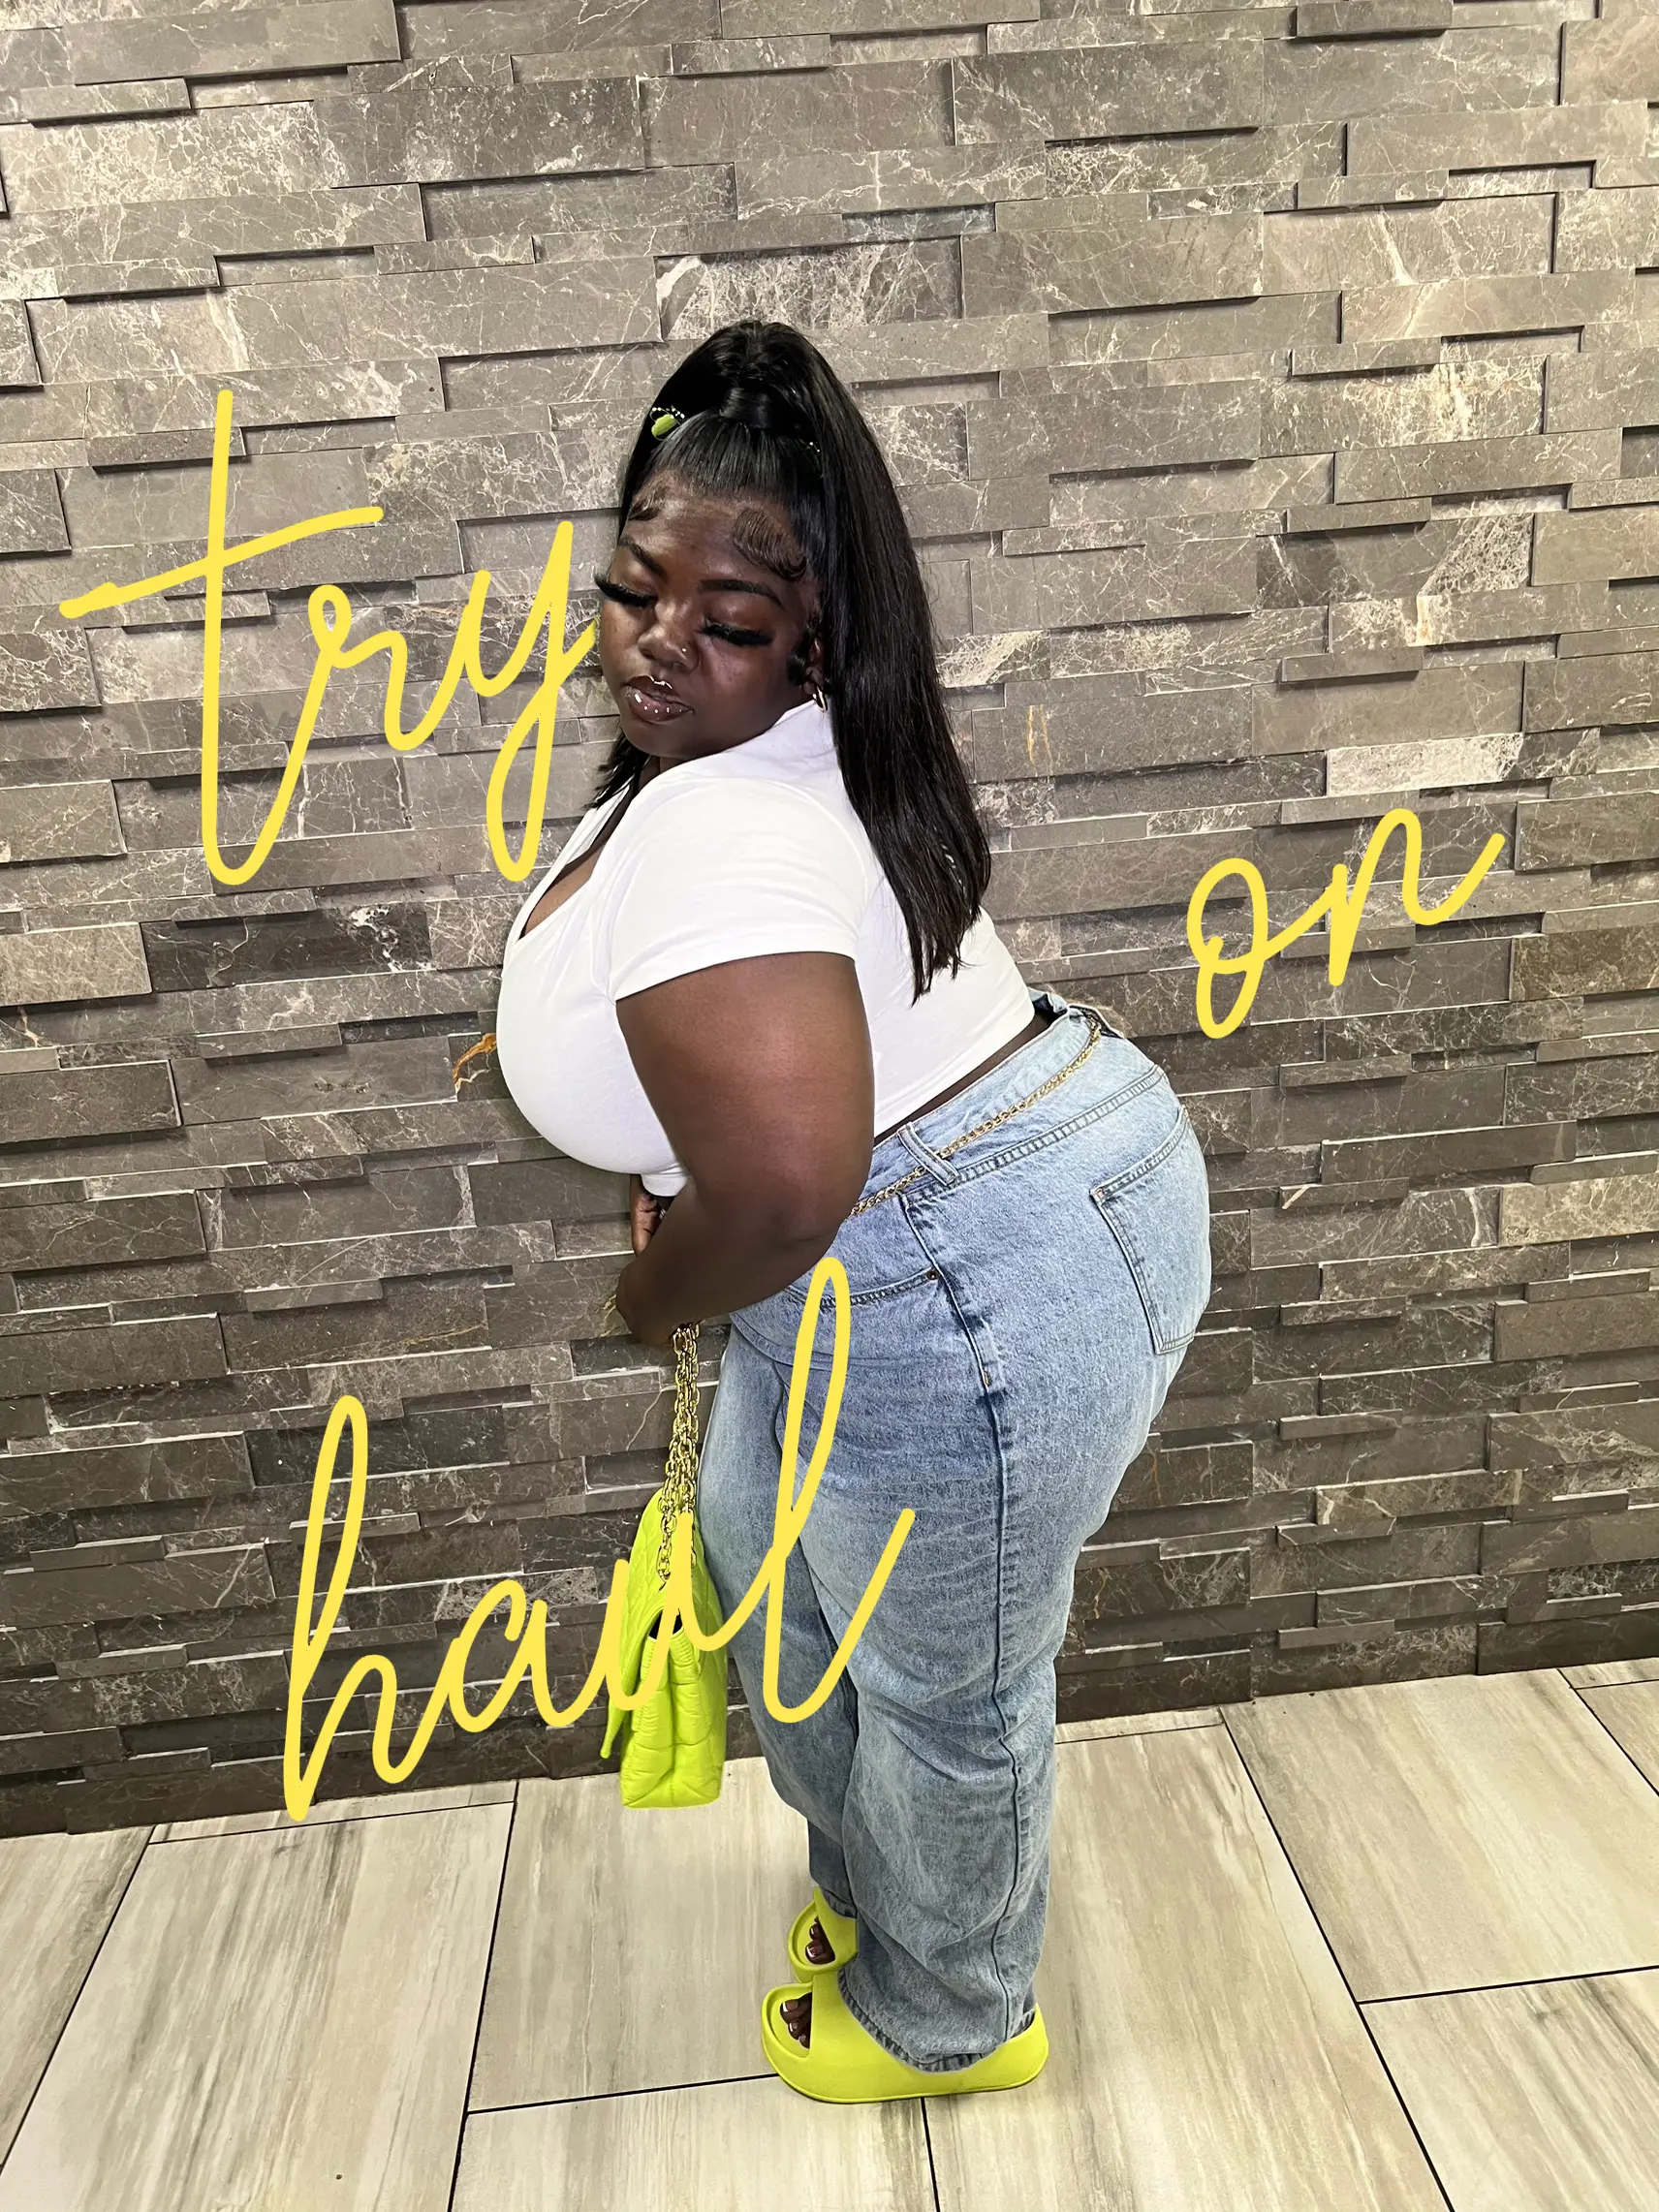 Affordable Fashion Nova jeans try on haul, Thick girl approved?, Sizes 5  -7